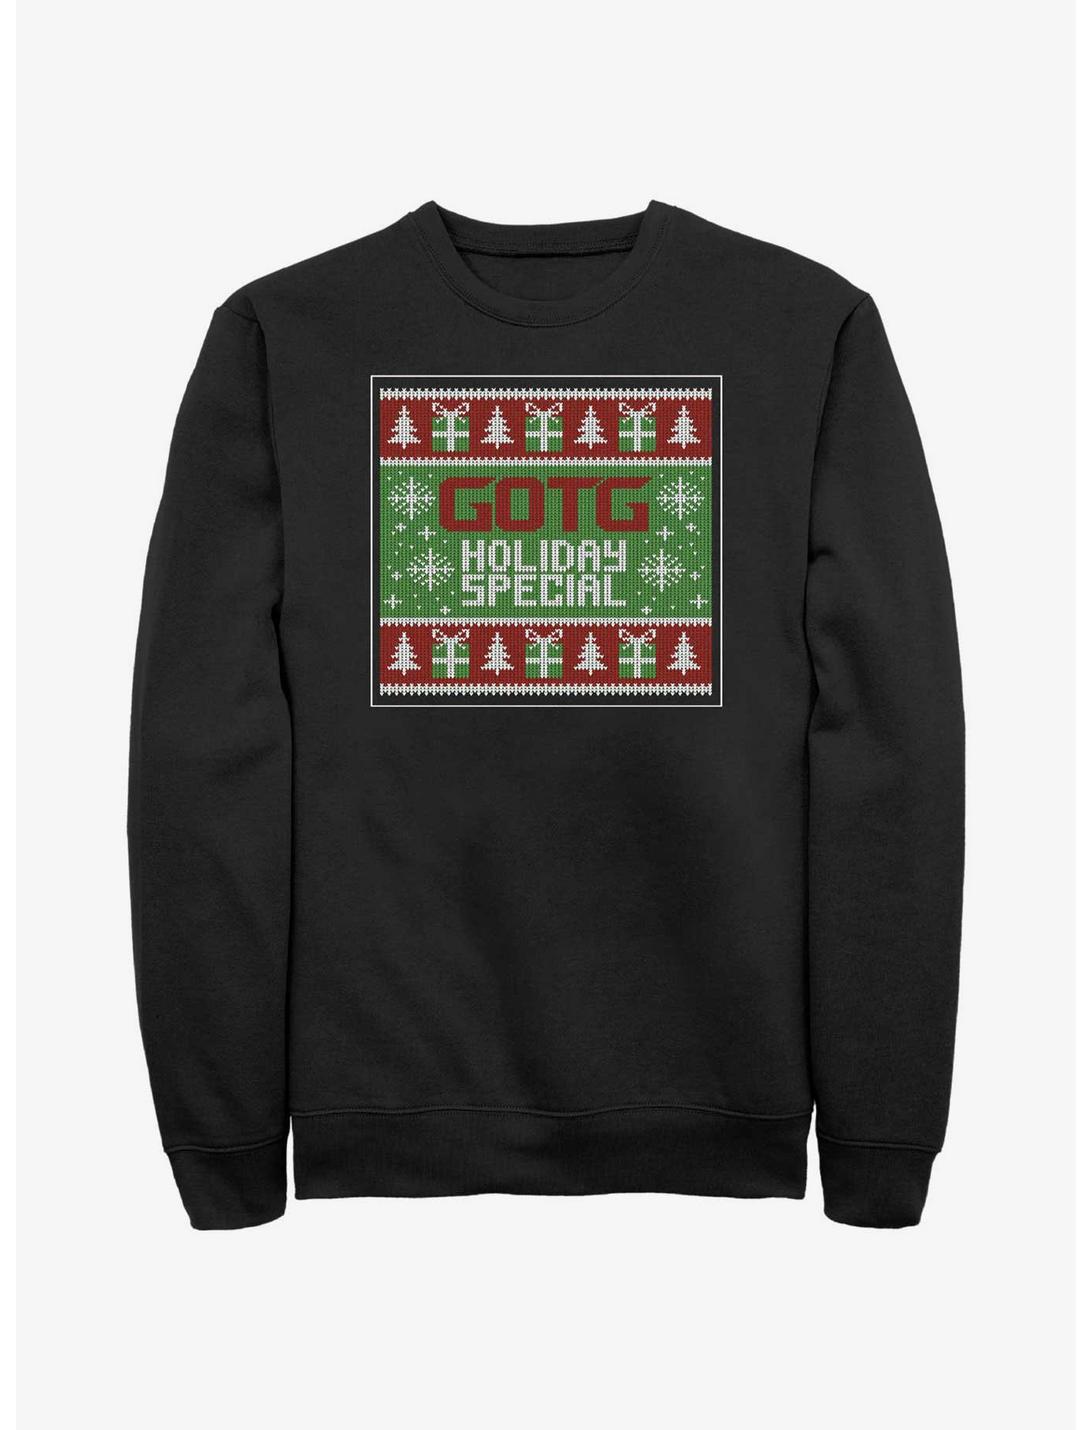 Marvel Guardians of the Galaxy Ugly Christmas Sweater Pattern Holiday Special Sweatshirt, BLACK, hi-res